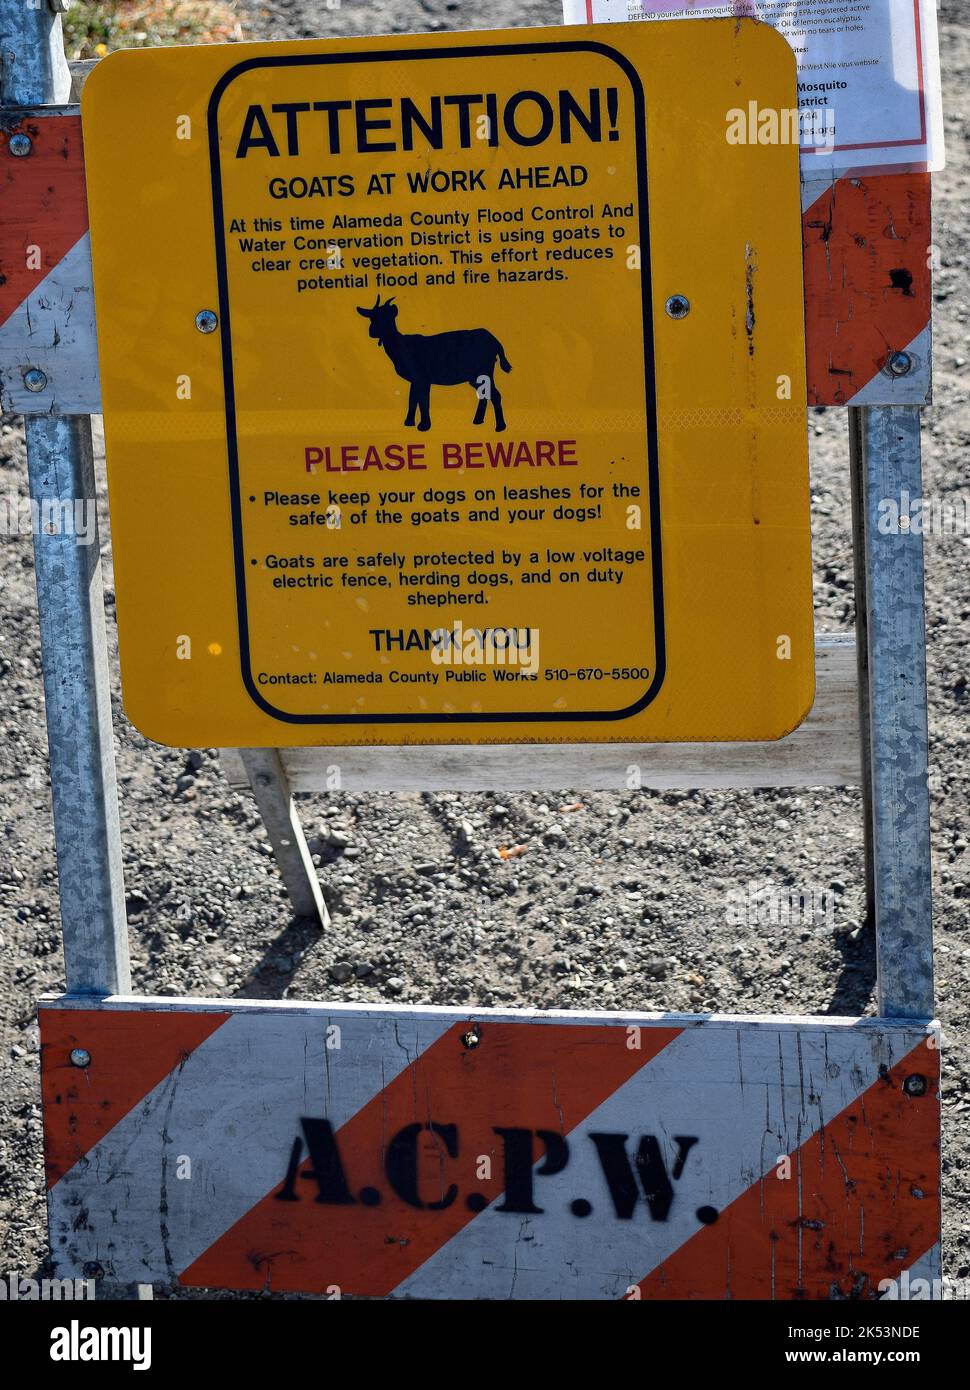 goats at work to reduce flood and fire hazards  sign along Alameda Creek in Union City, California Stock Photo